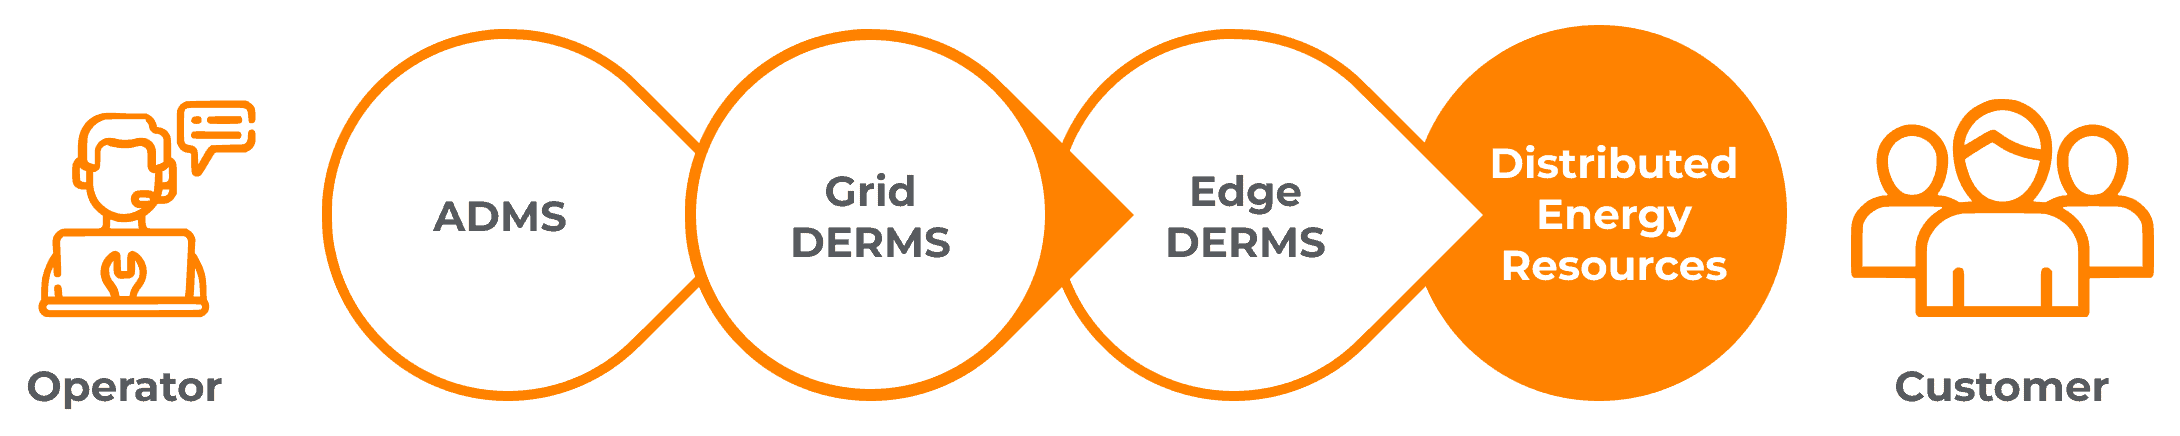 A flow chart shows how ADMS, Grid DERMS, VPP Aggregator, and DER programs work together to optimize operator and customer energy supply and demand.